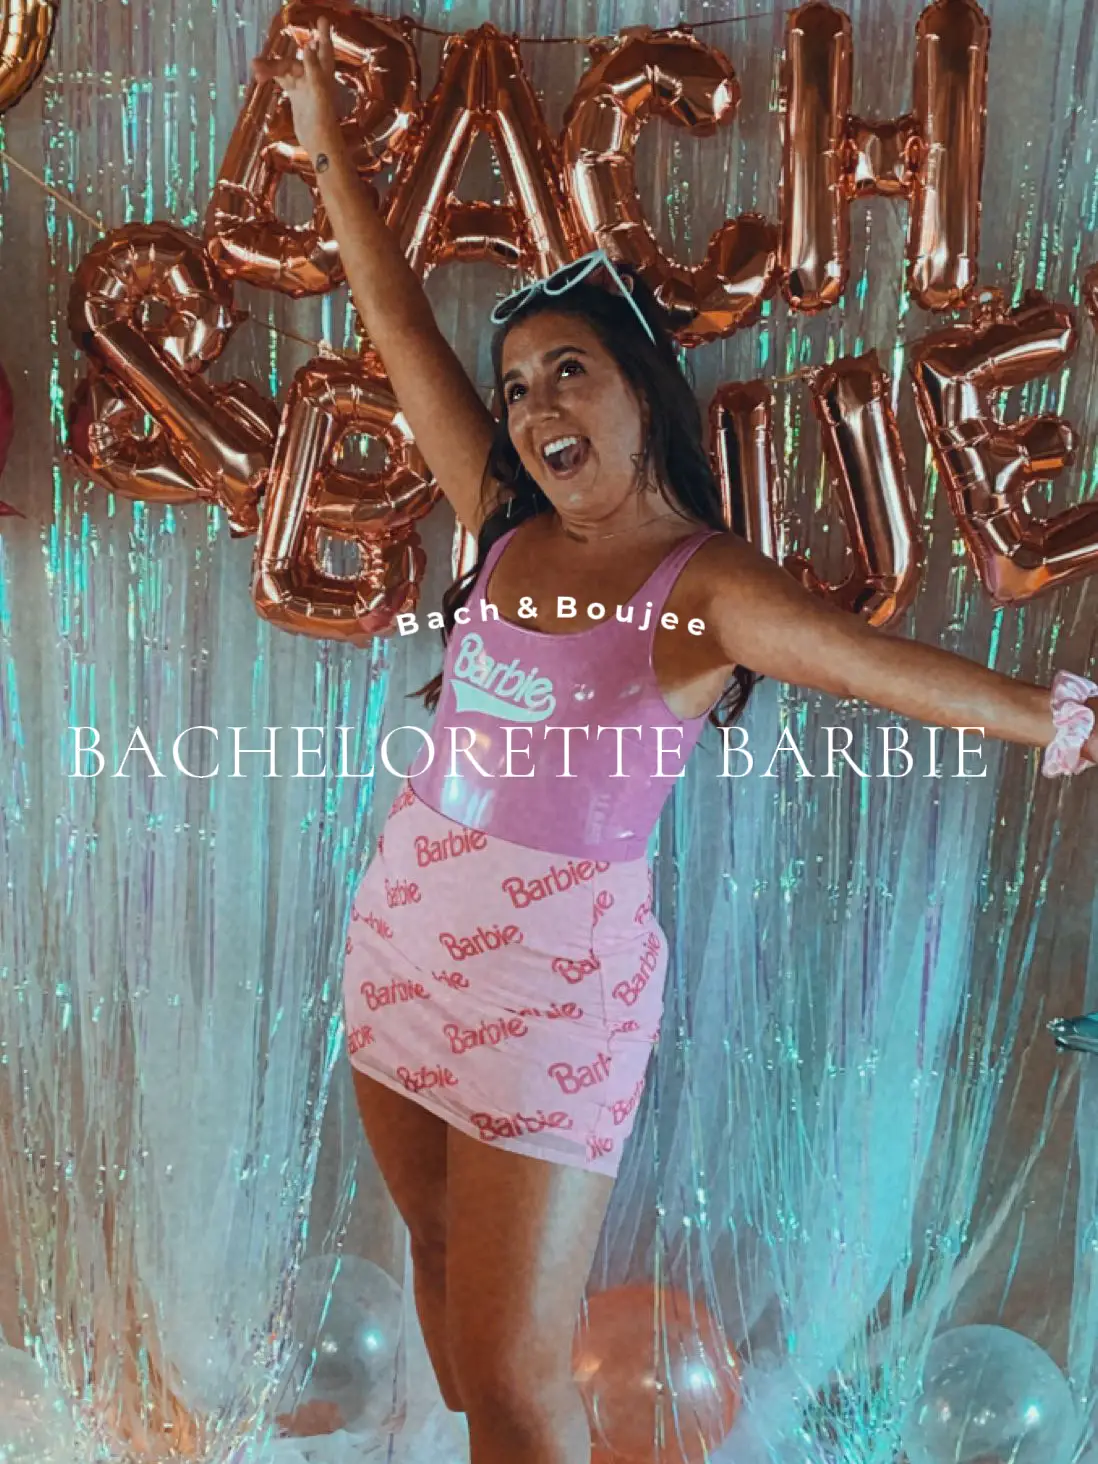 She Found Her Lover, Bridal Era Bachelorette Kit – Bach and Boujee